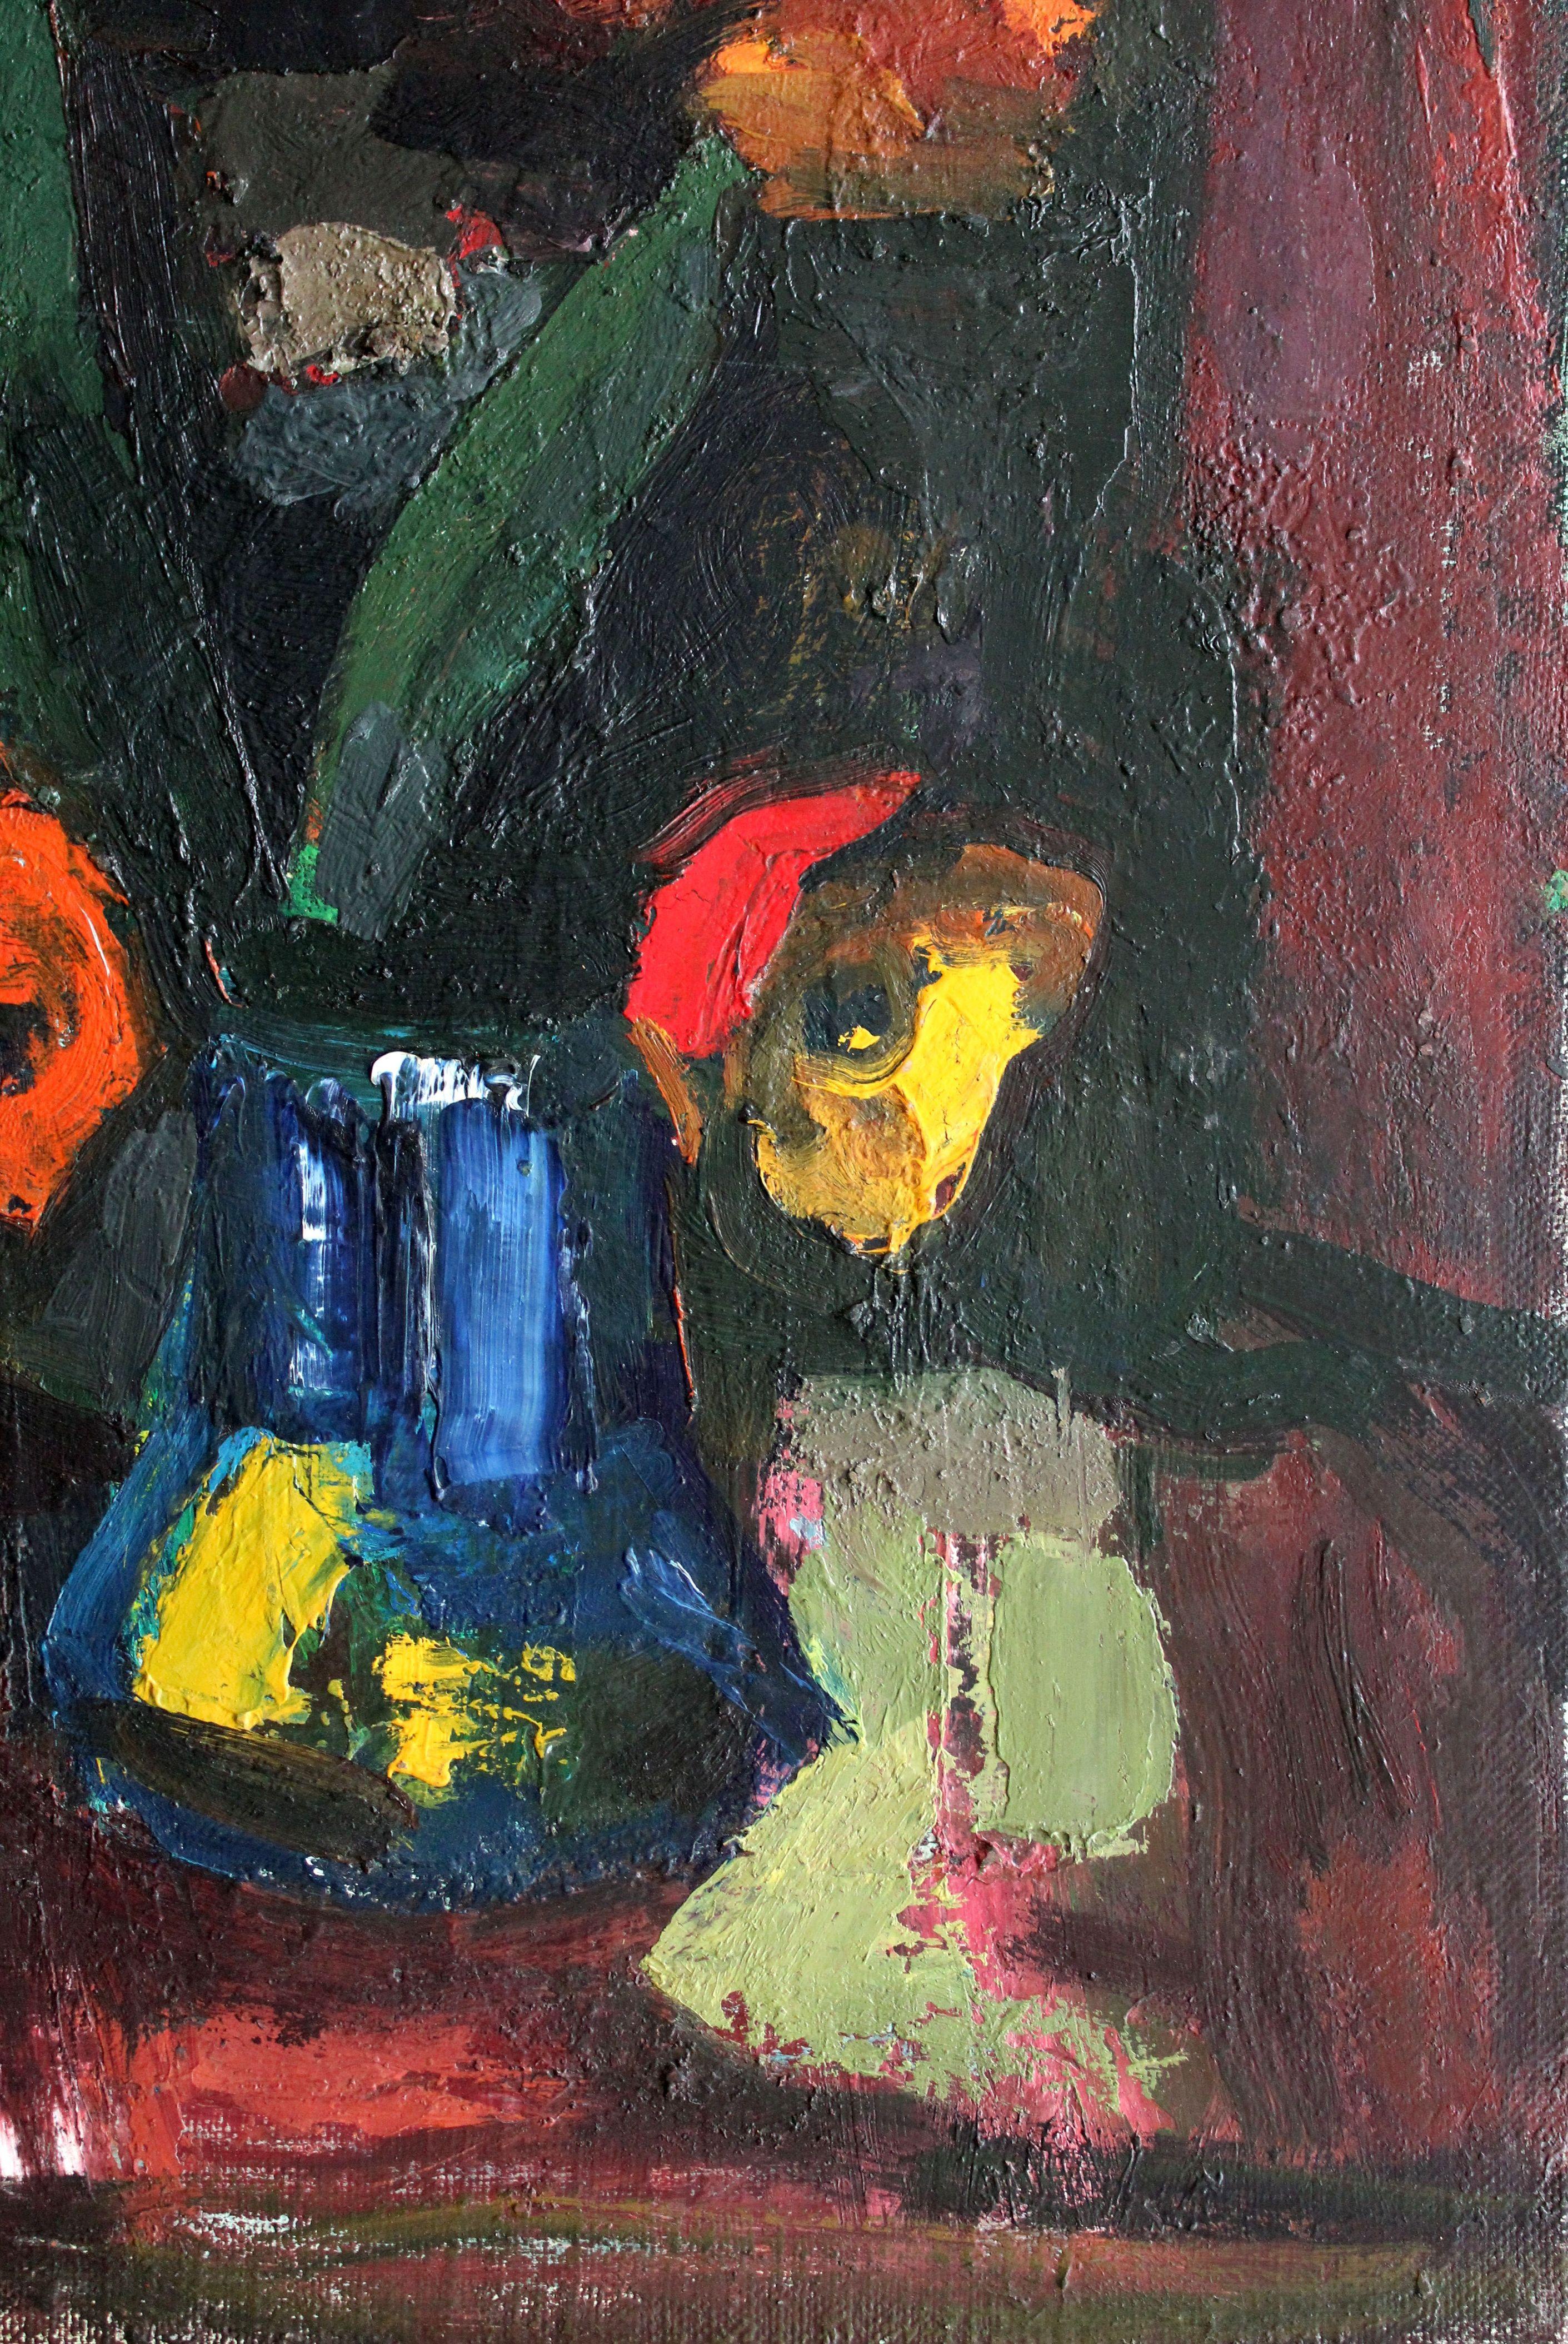 Flowers. Canvas, cardboard, oil, 69x50 cm - Expressionist Painting by Aleksandr Rodin